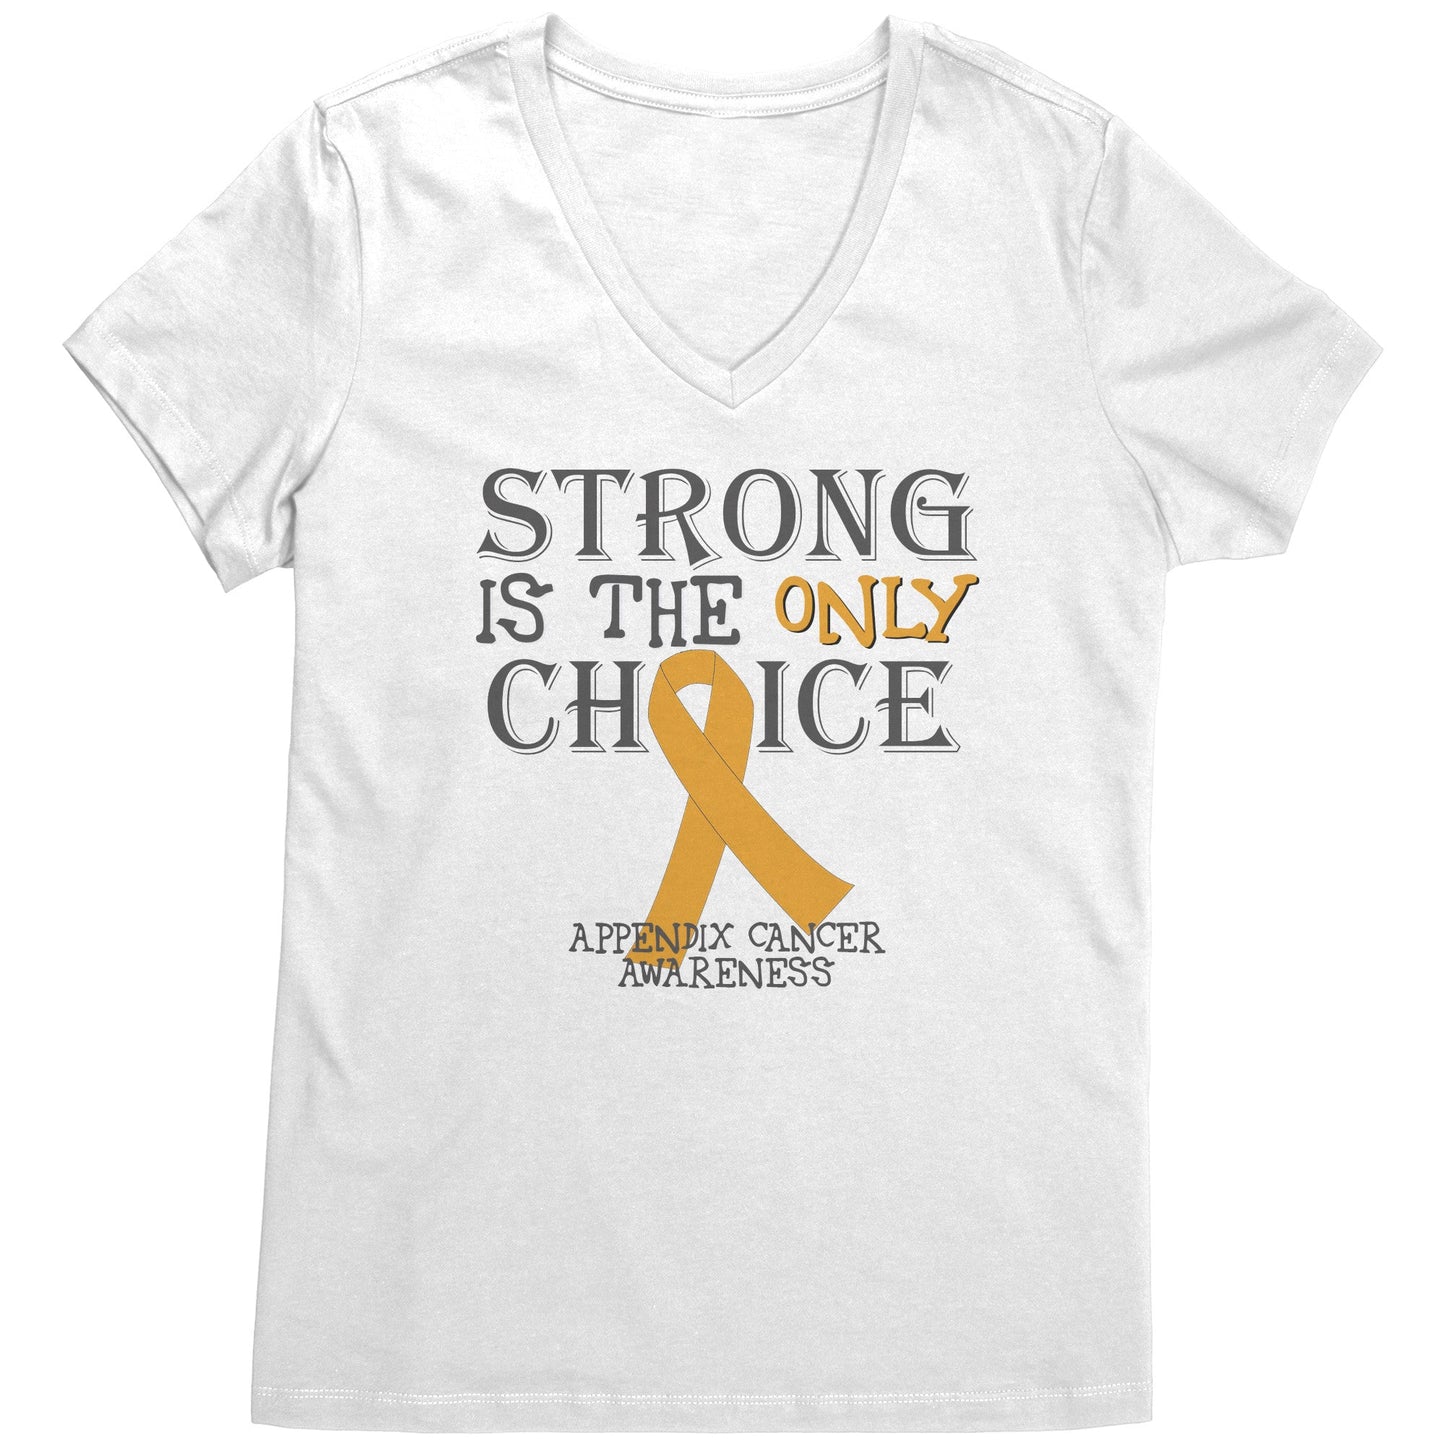 Strong is the Only Choice -Appendix Cancer Awareness T-Shirt, Hoodie, Tank |x|